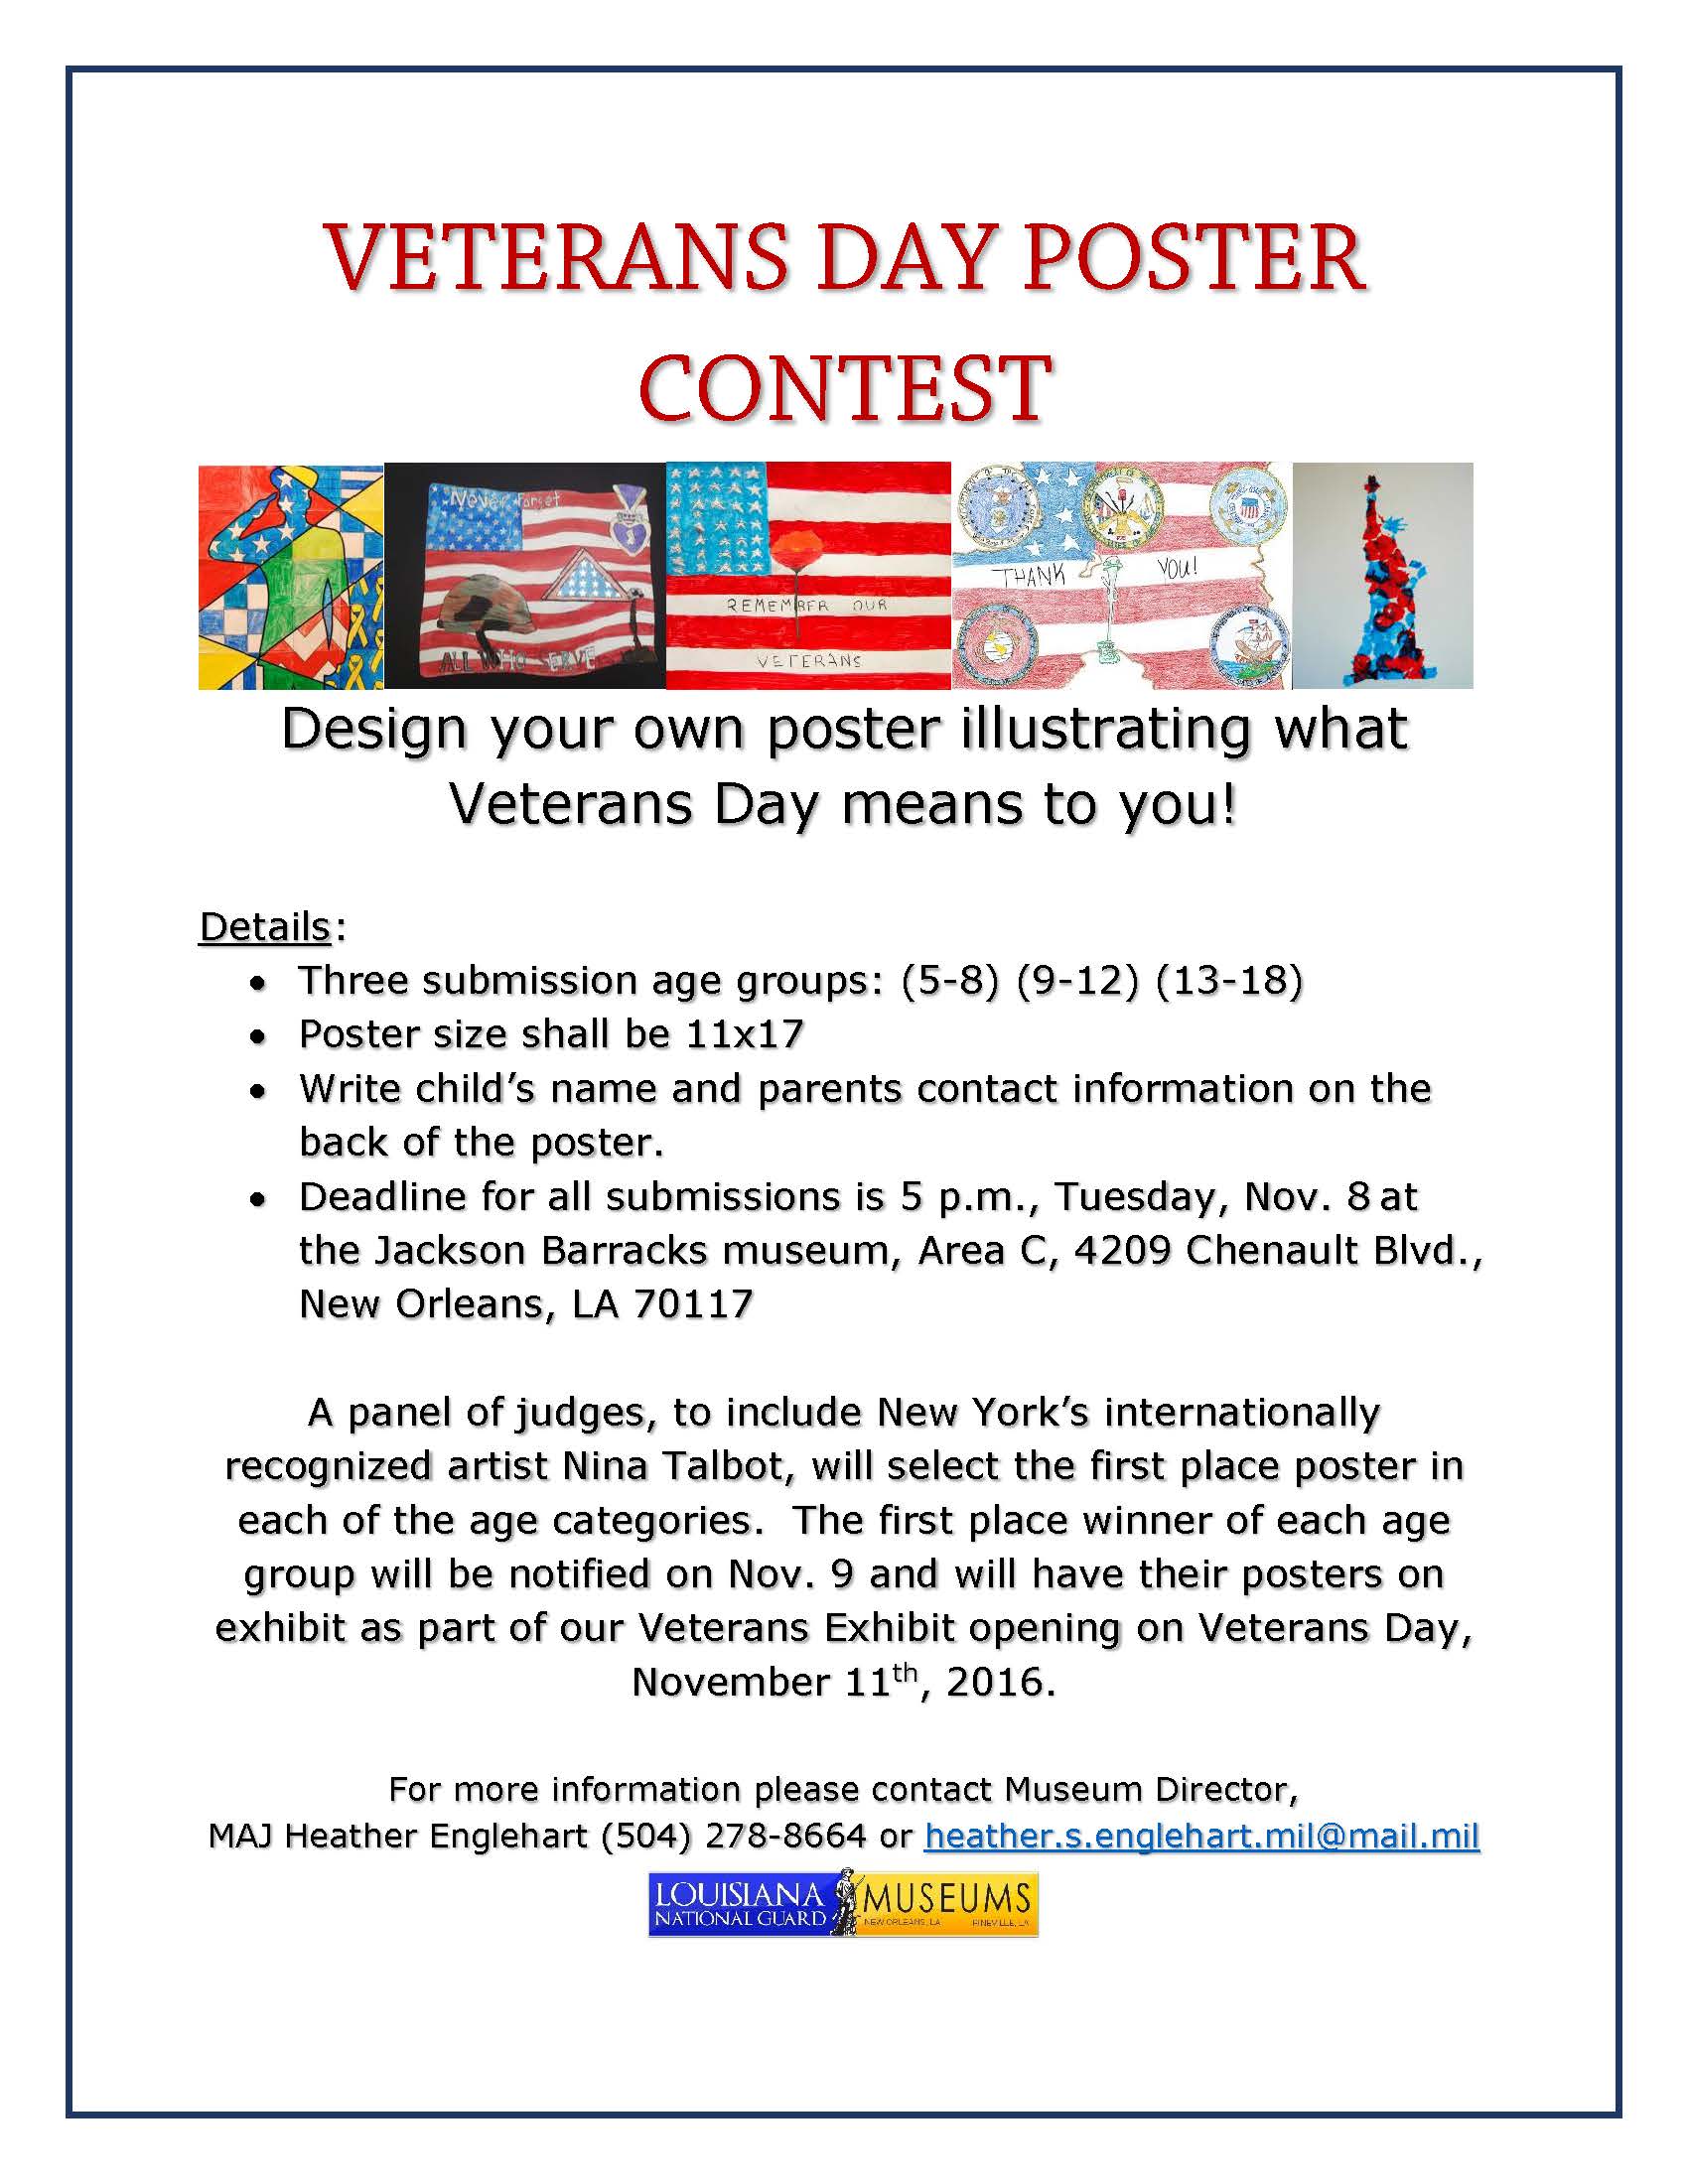 veterans-day-poster-contest